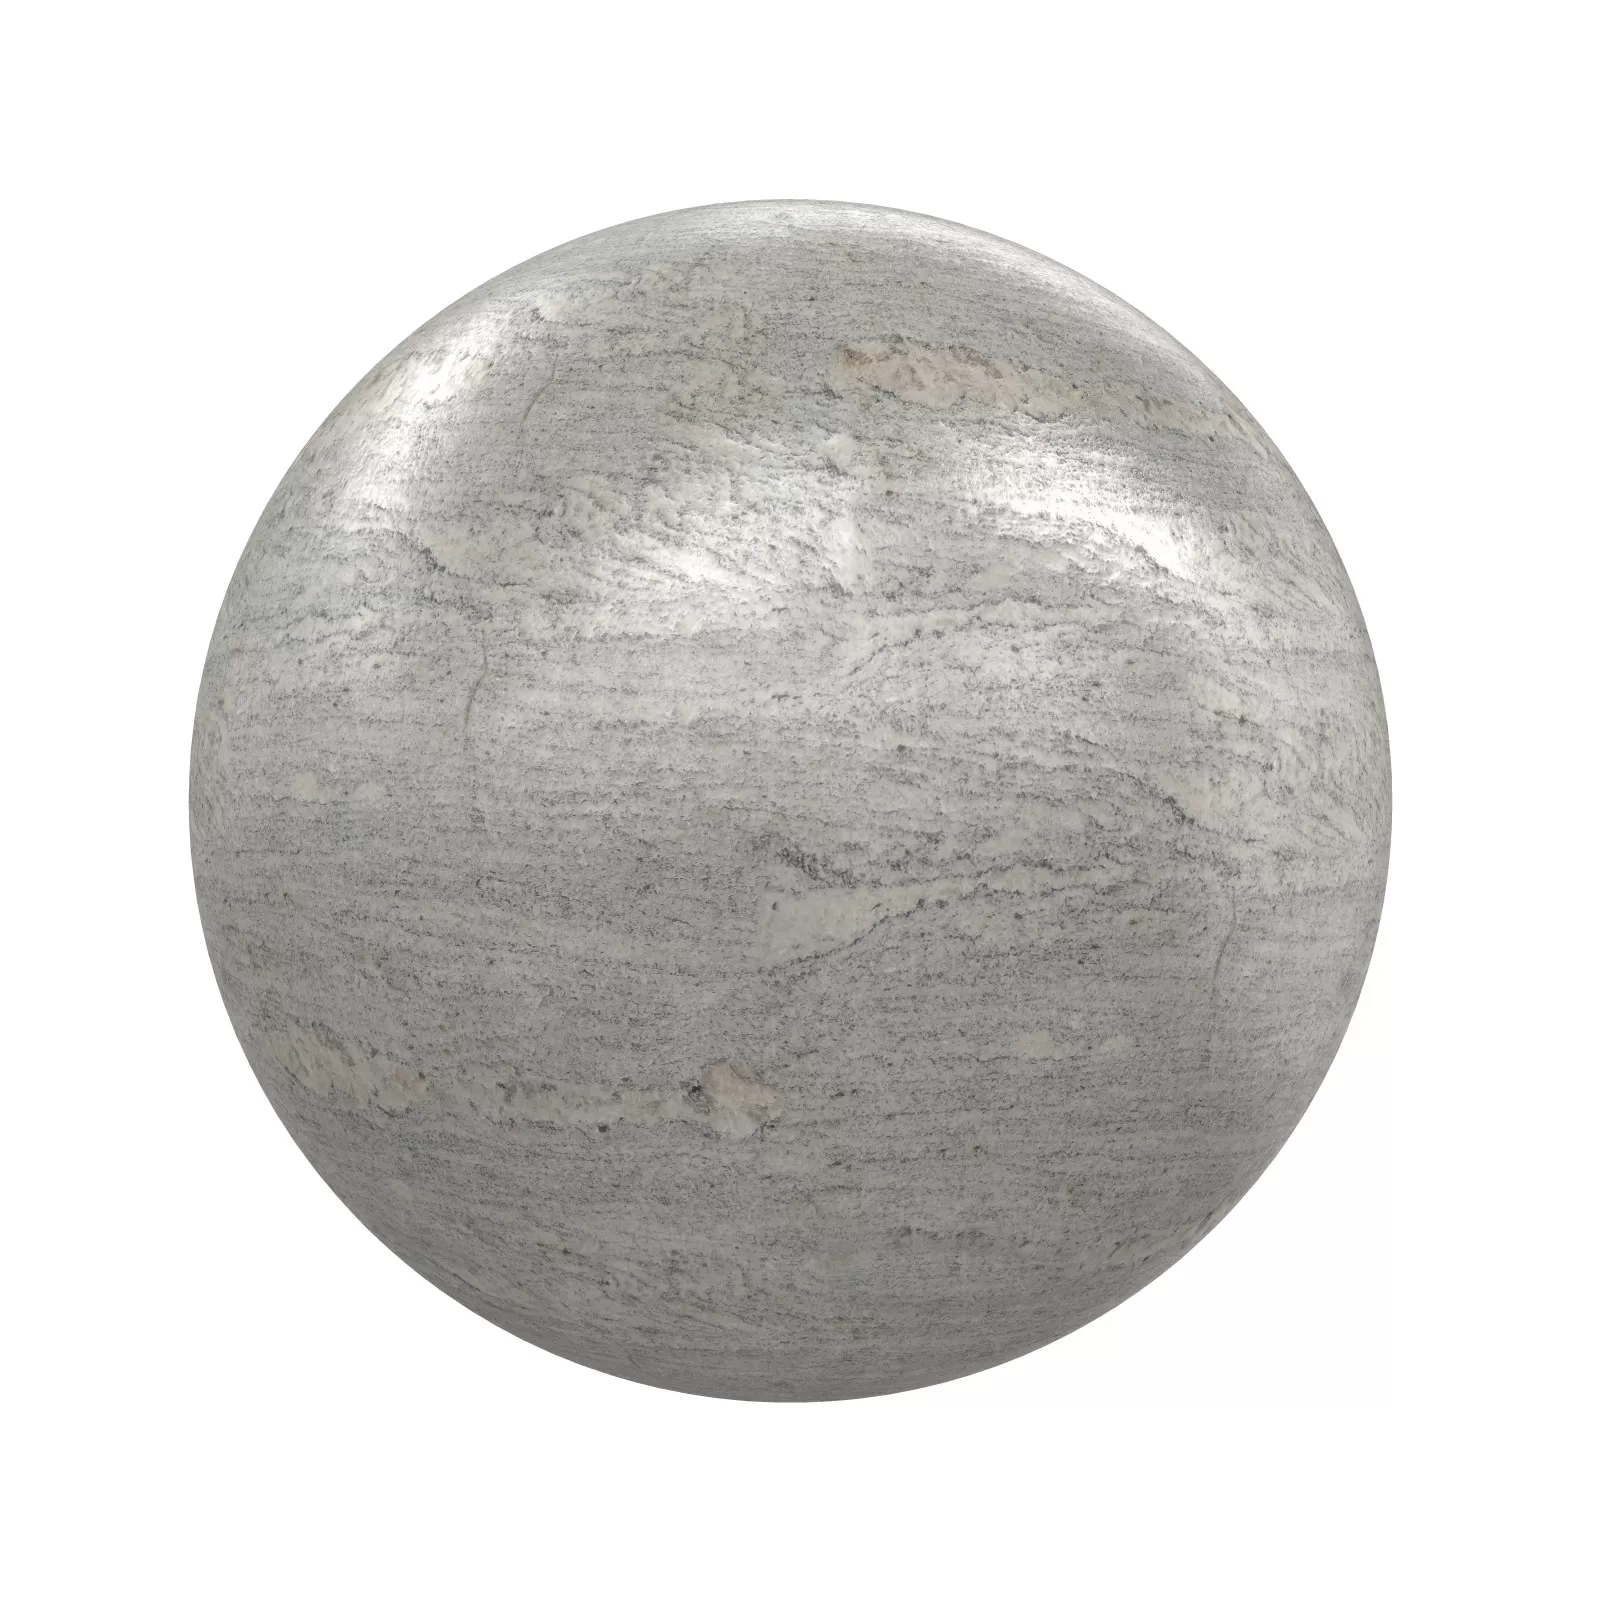 TEXTURES – STONES – CGAxis PBR Colection Vol 1 Stones – grey shiny stone 2